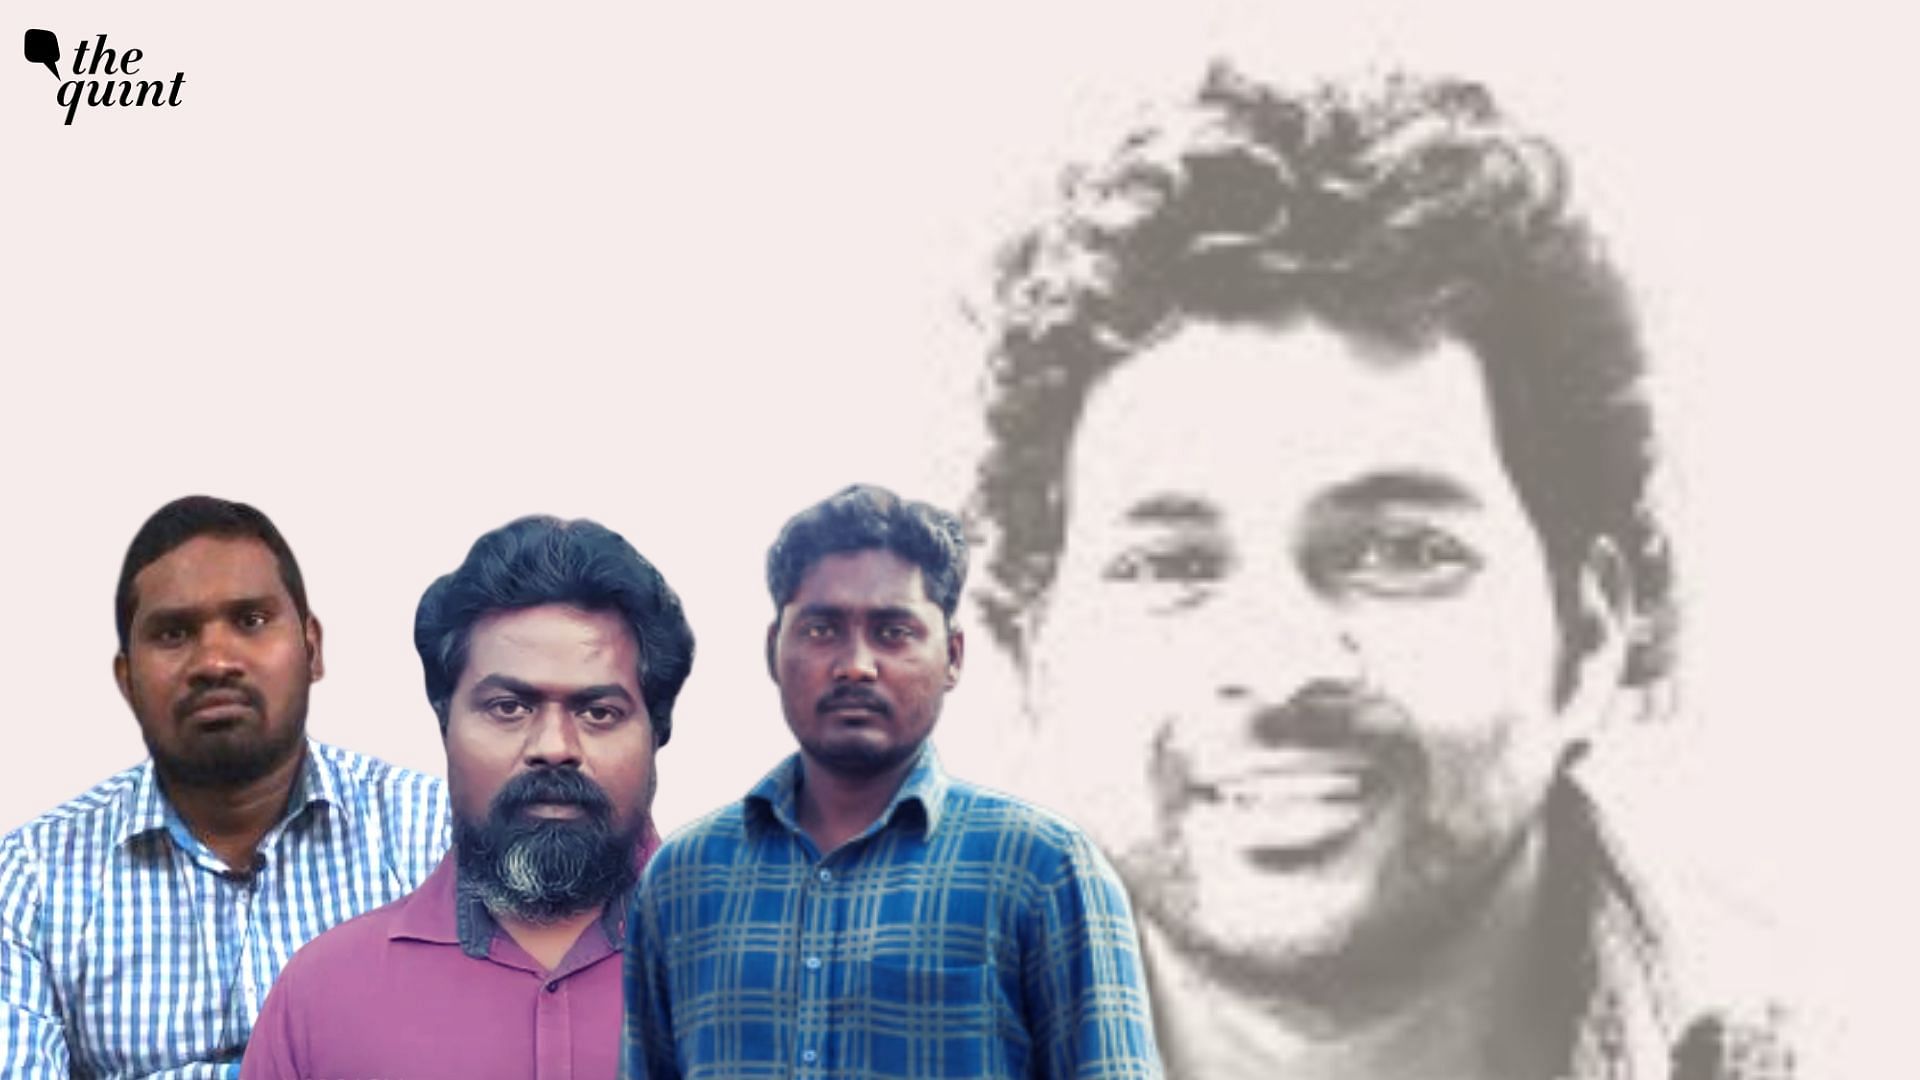 Four years after his death, The Quint caught up with his friends, who said their lives and dreams have changed but their struggle for justice continues. 